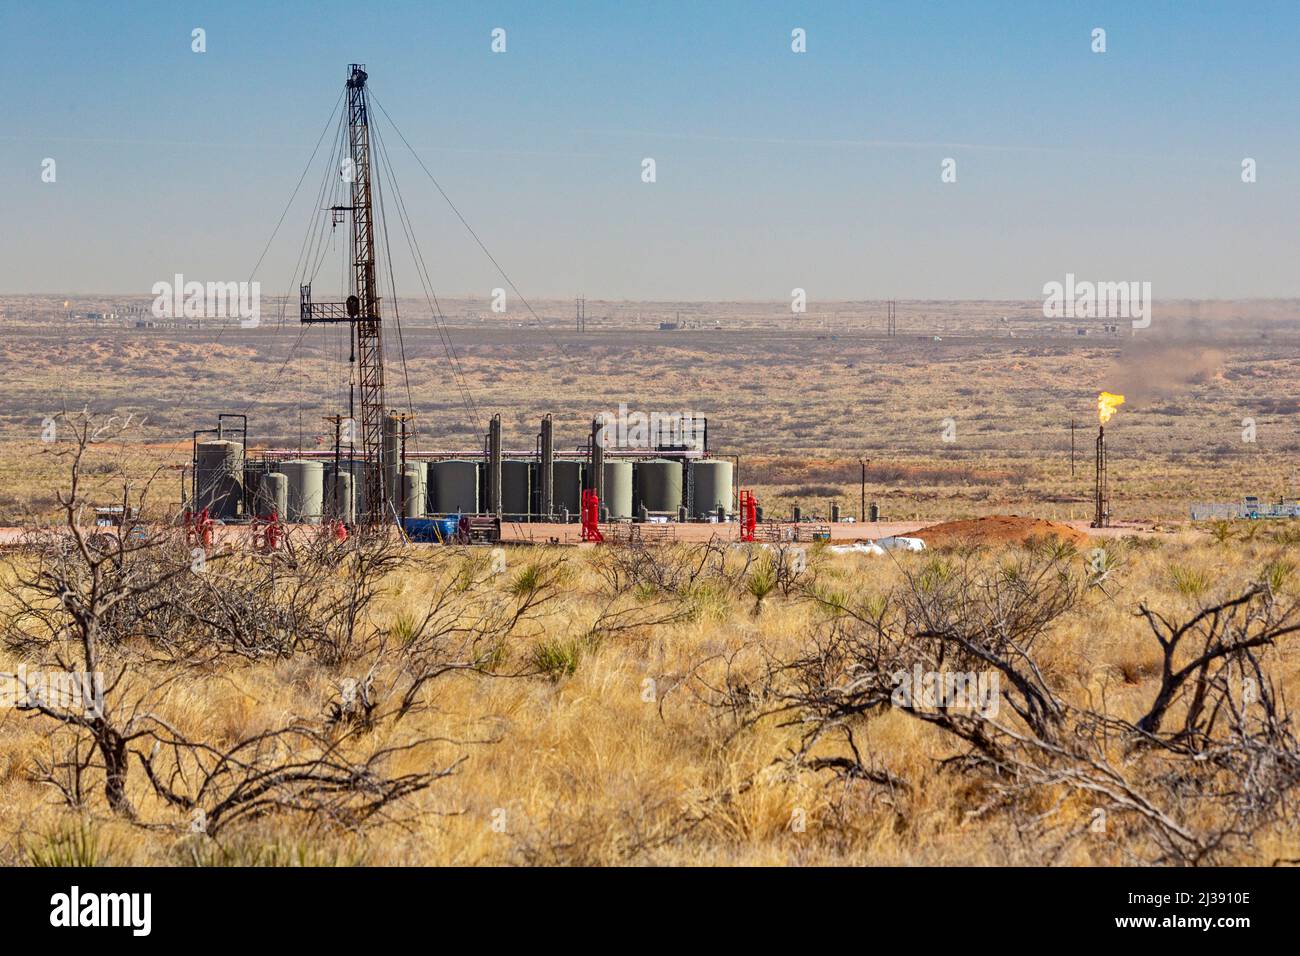 Loving, New Mexico - An oil drilling rig and oil storage tanks in the Permian Basin. The Permian Basin is a major oil and gas producing are. Stock Photo